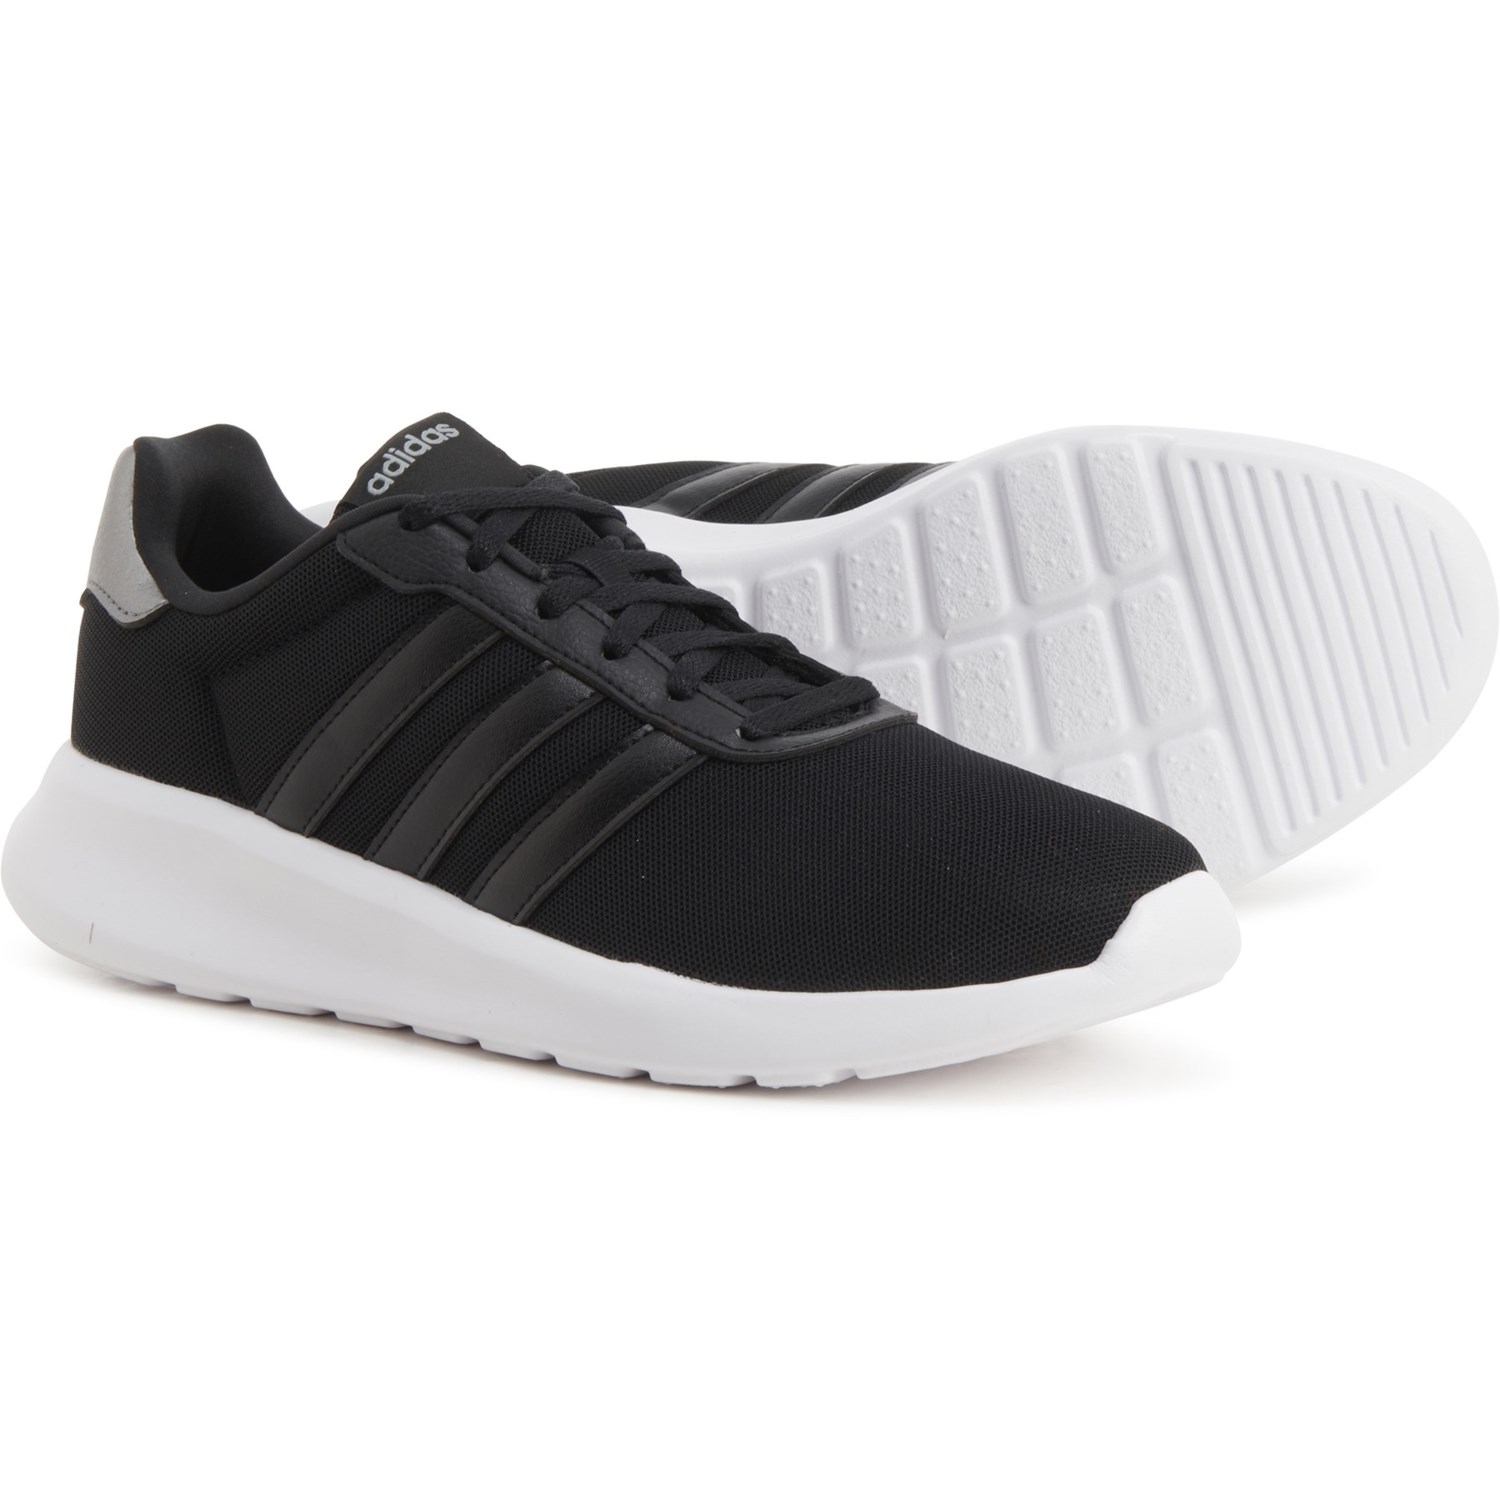 ethics Laziness Tap adidas Lite Racer 3.0 Running Shoes (For Women) - Save 55%